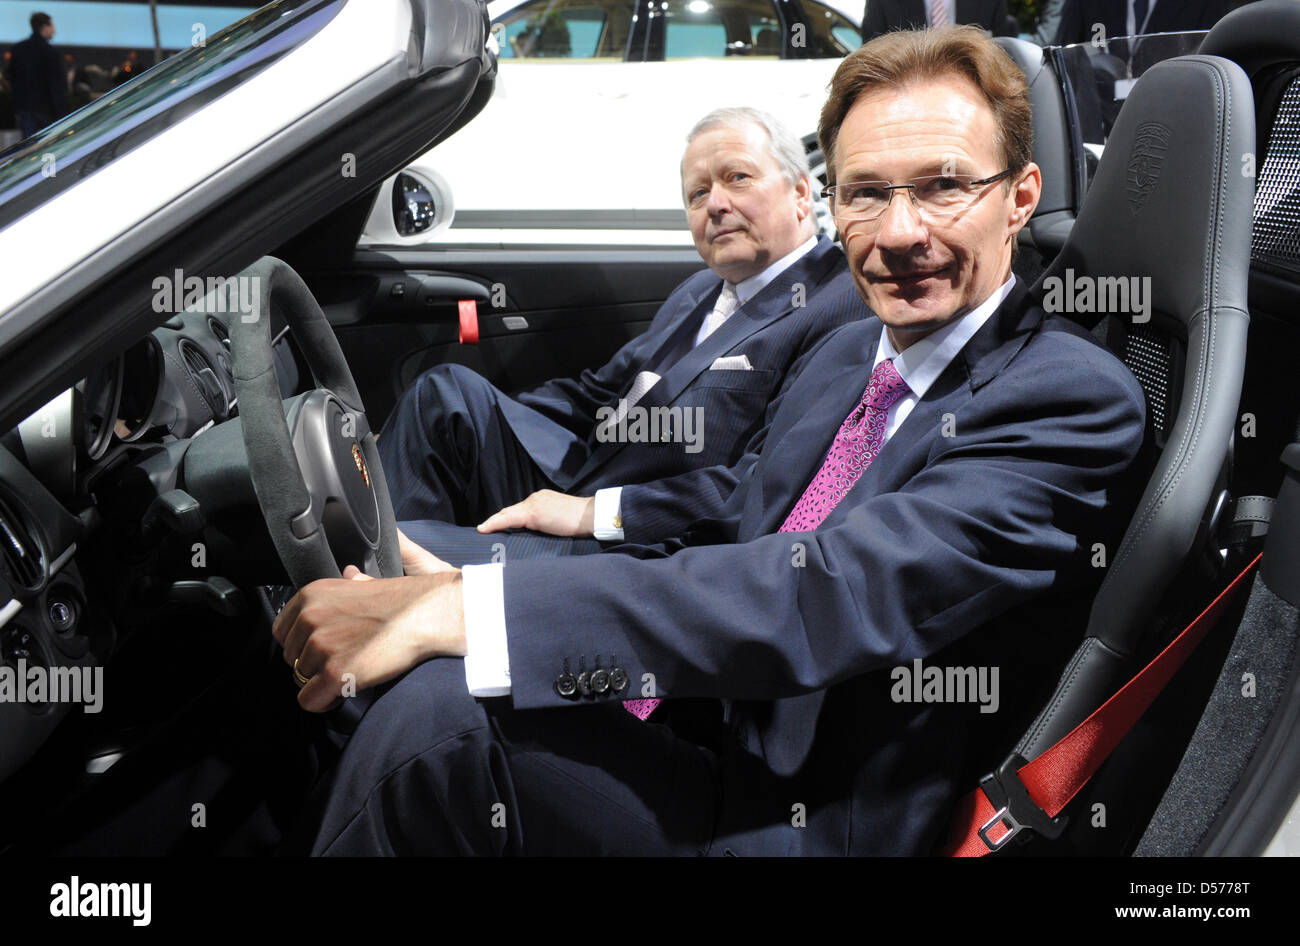 Michael Macht (R), CEO of Porsche AG, and Wolfgang Porsche, chairman of the Porsche supervisory board, sit in a Porsche Boxter Spyder prior to the general meeting of Volkswagen AG in Hamburg, Germany, 22 April 2010. Europe's largest automaker Volkswagen increased its profits in the first quarter of 2010. The earnings after taxes increased by nearly 95 per cent to 473 million euros, Stock Photo